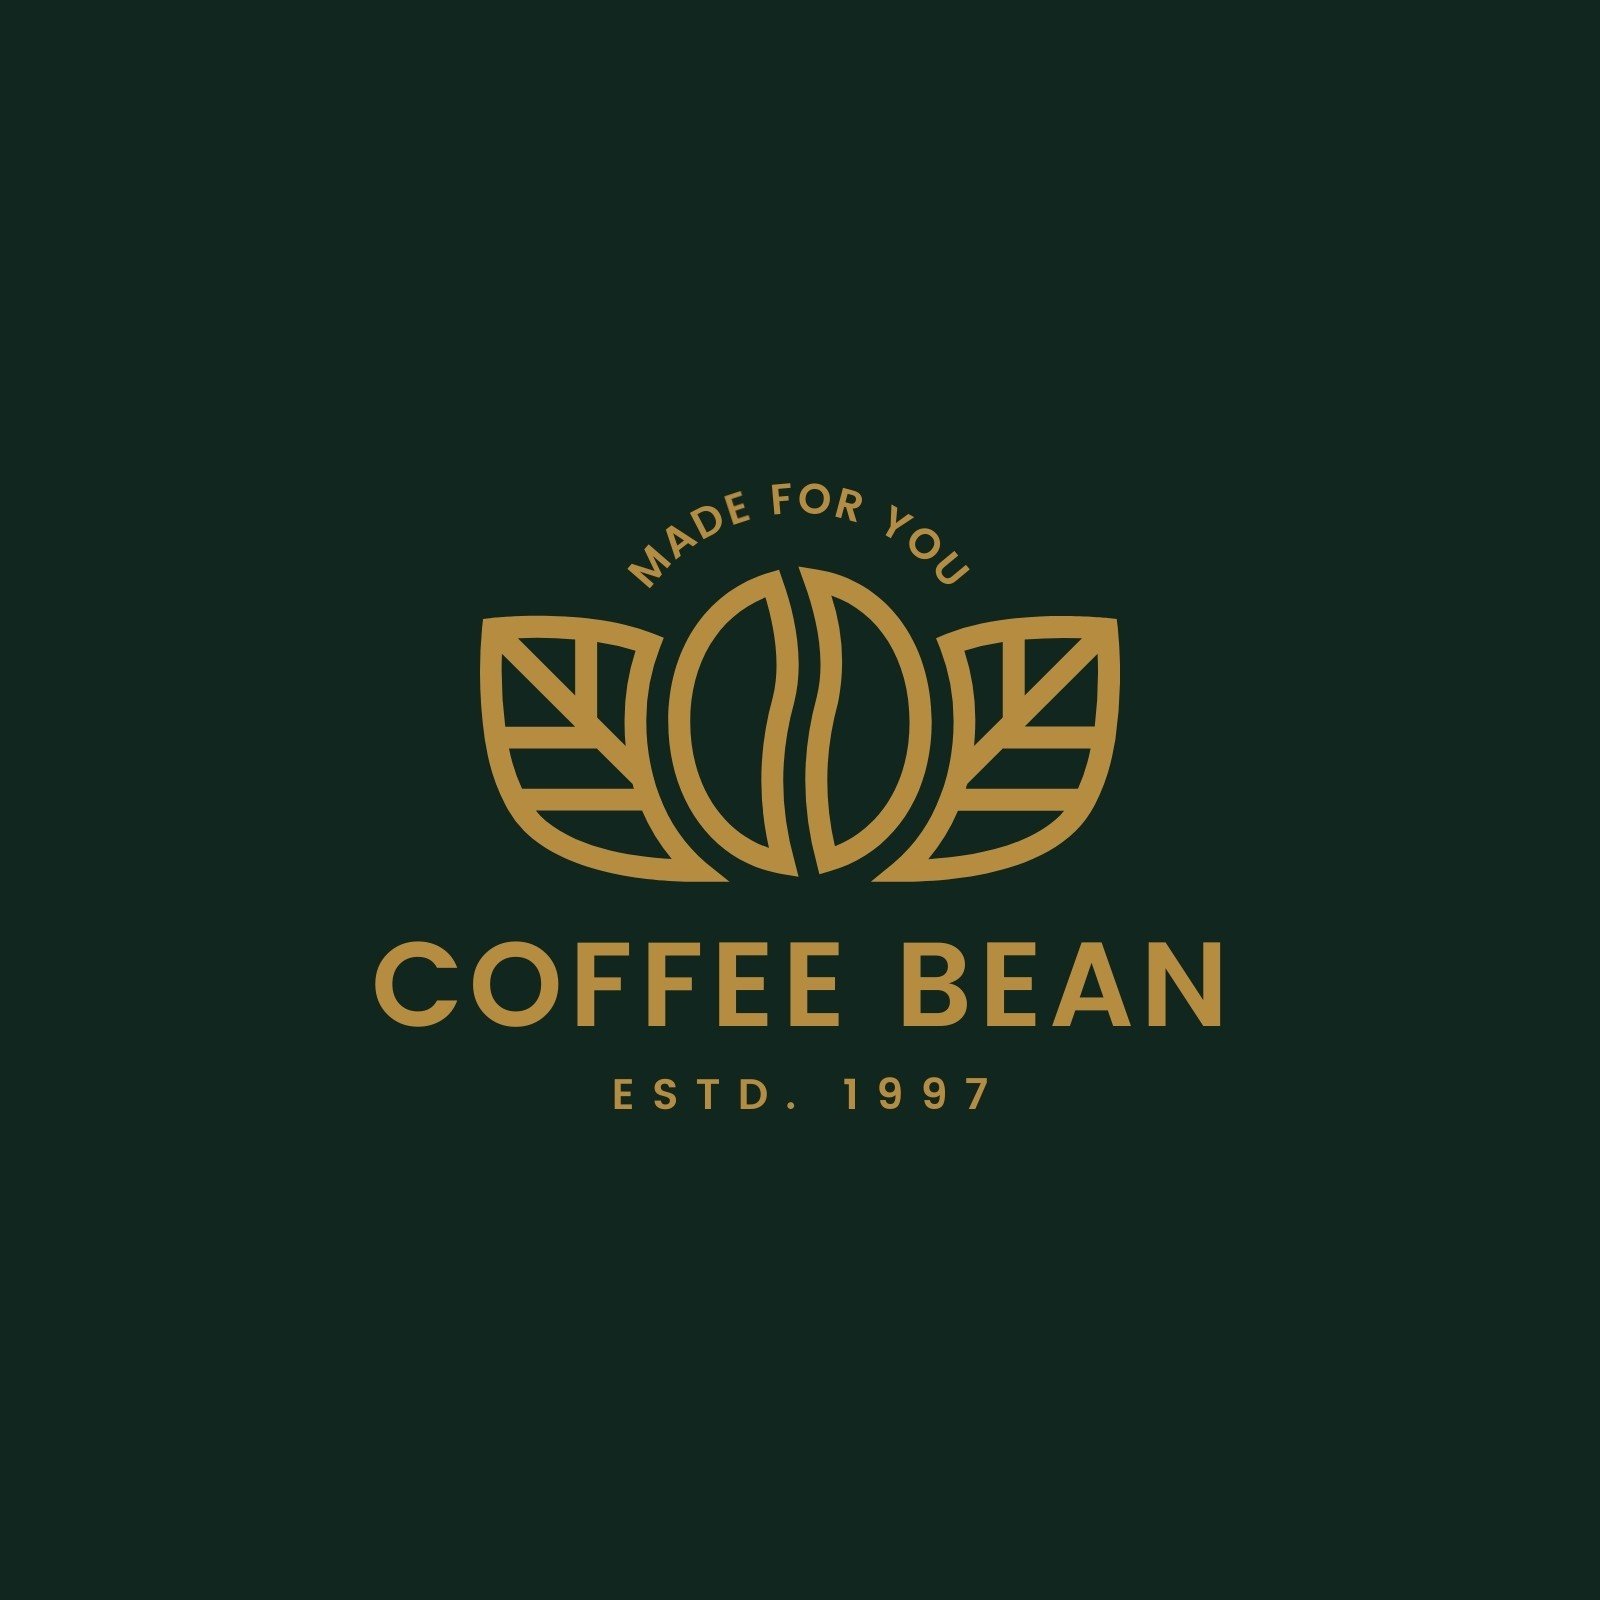 coffee bean logo meaning